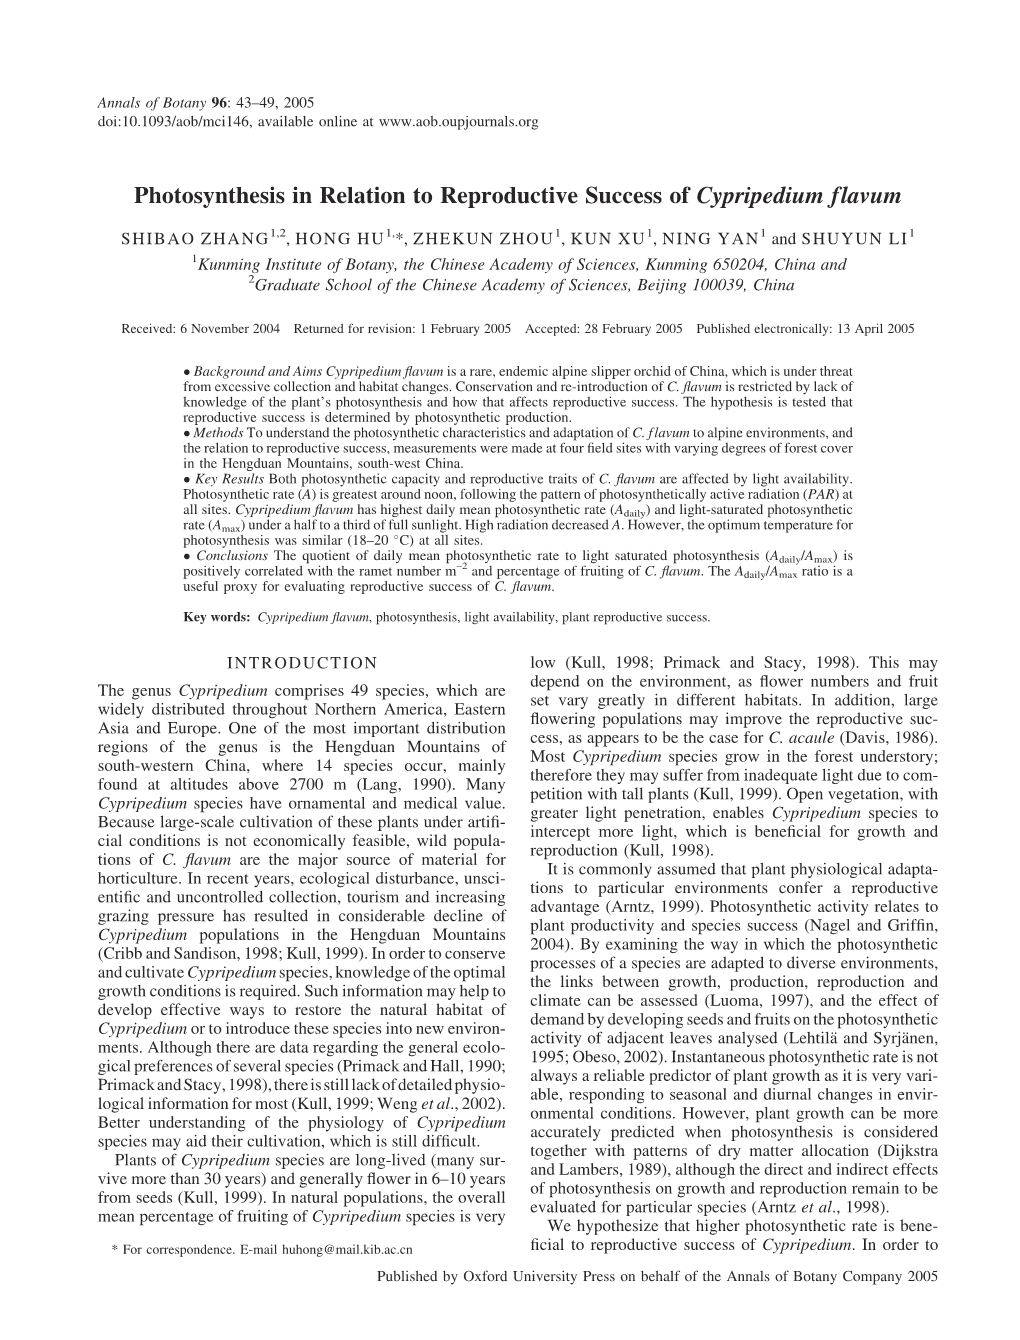 Photosynthesis in Relation to Reproductive Success of Cypripedium Flavum